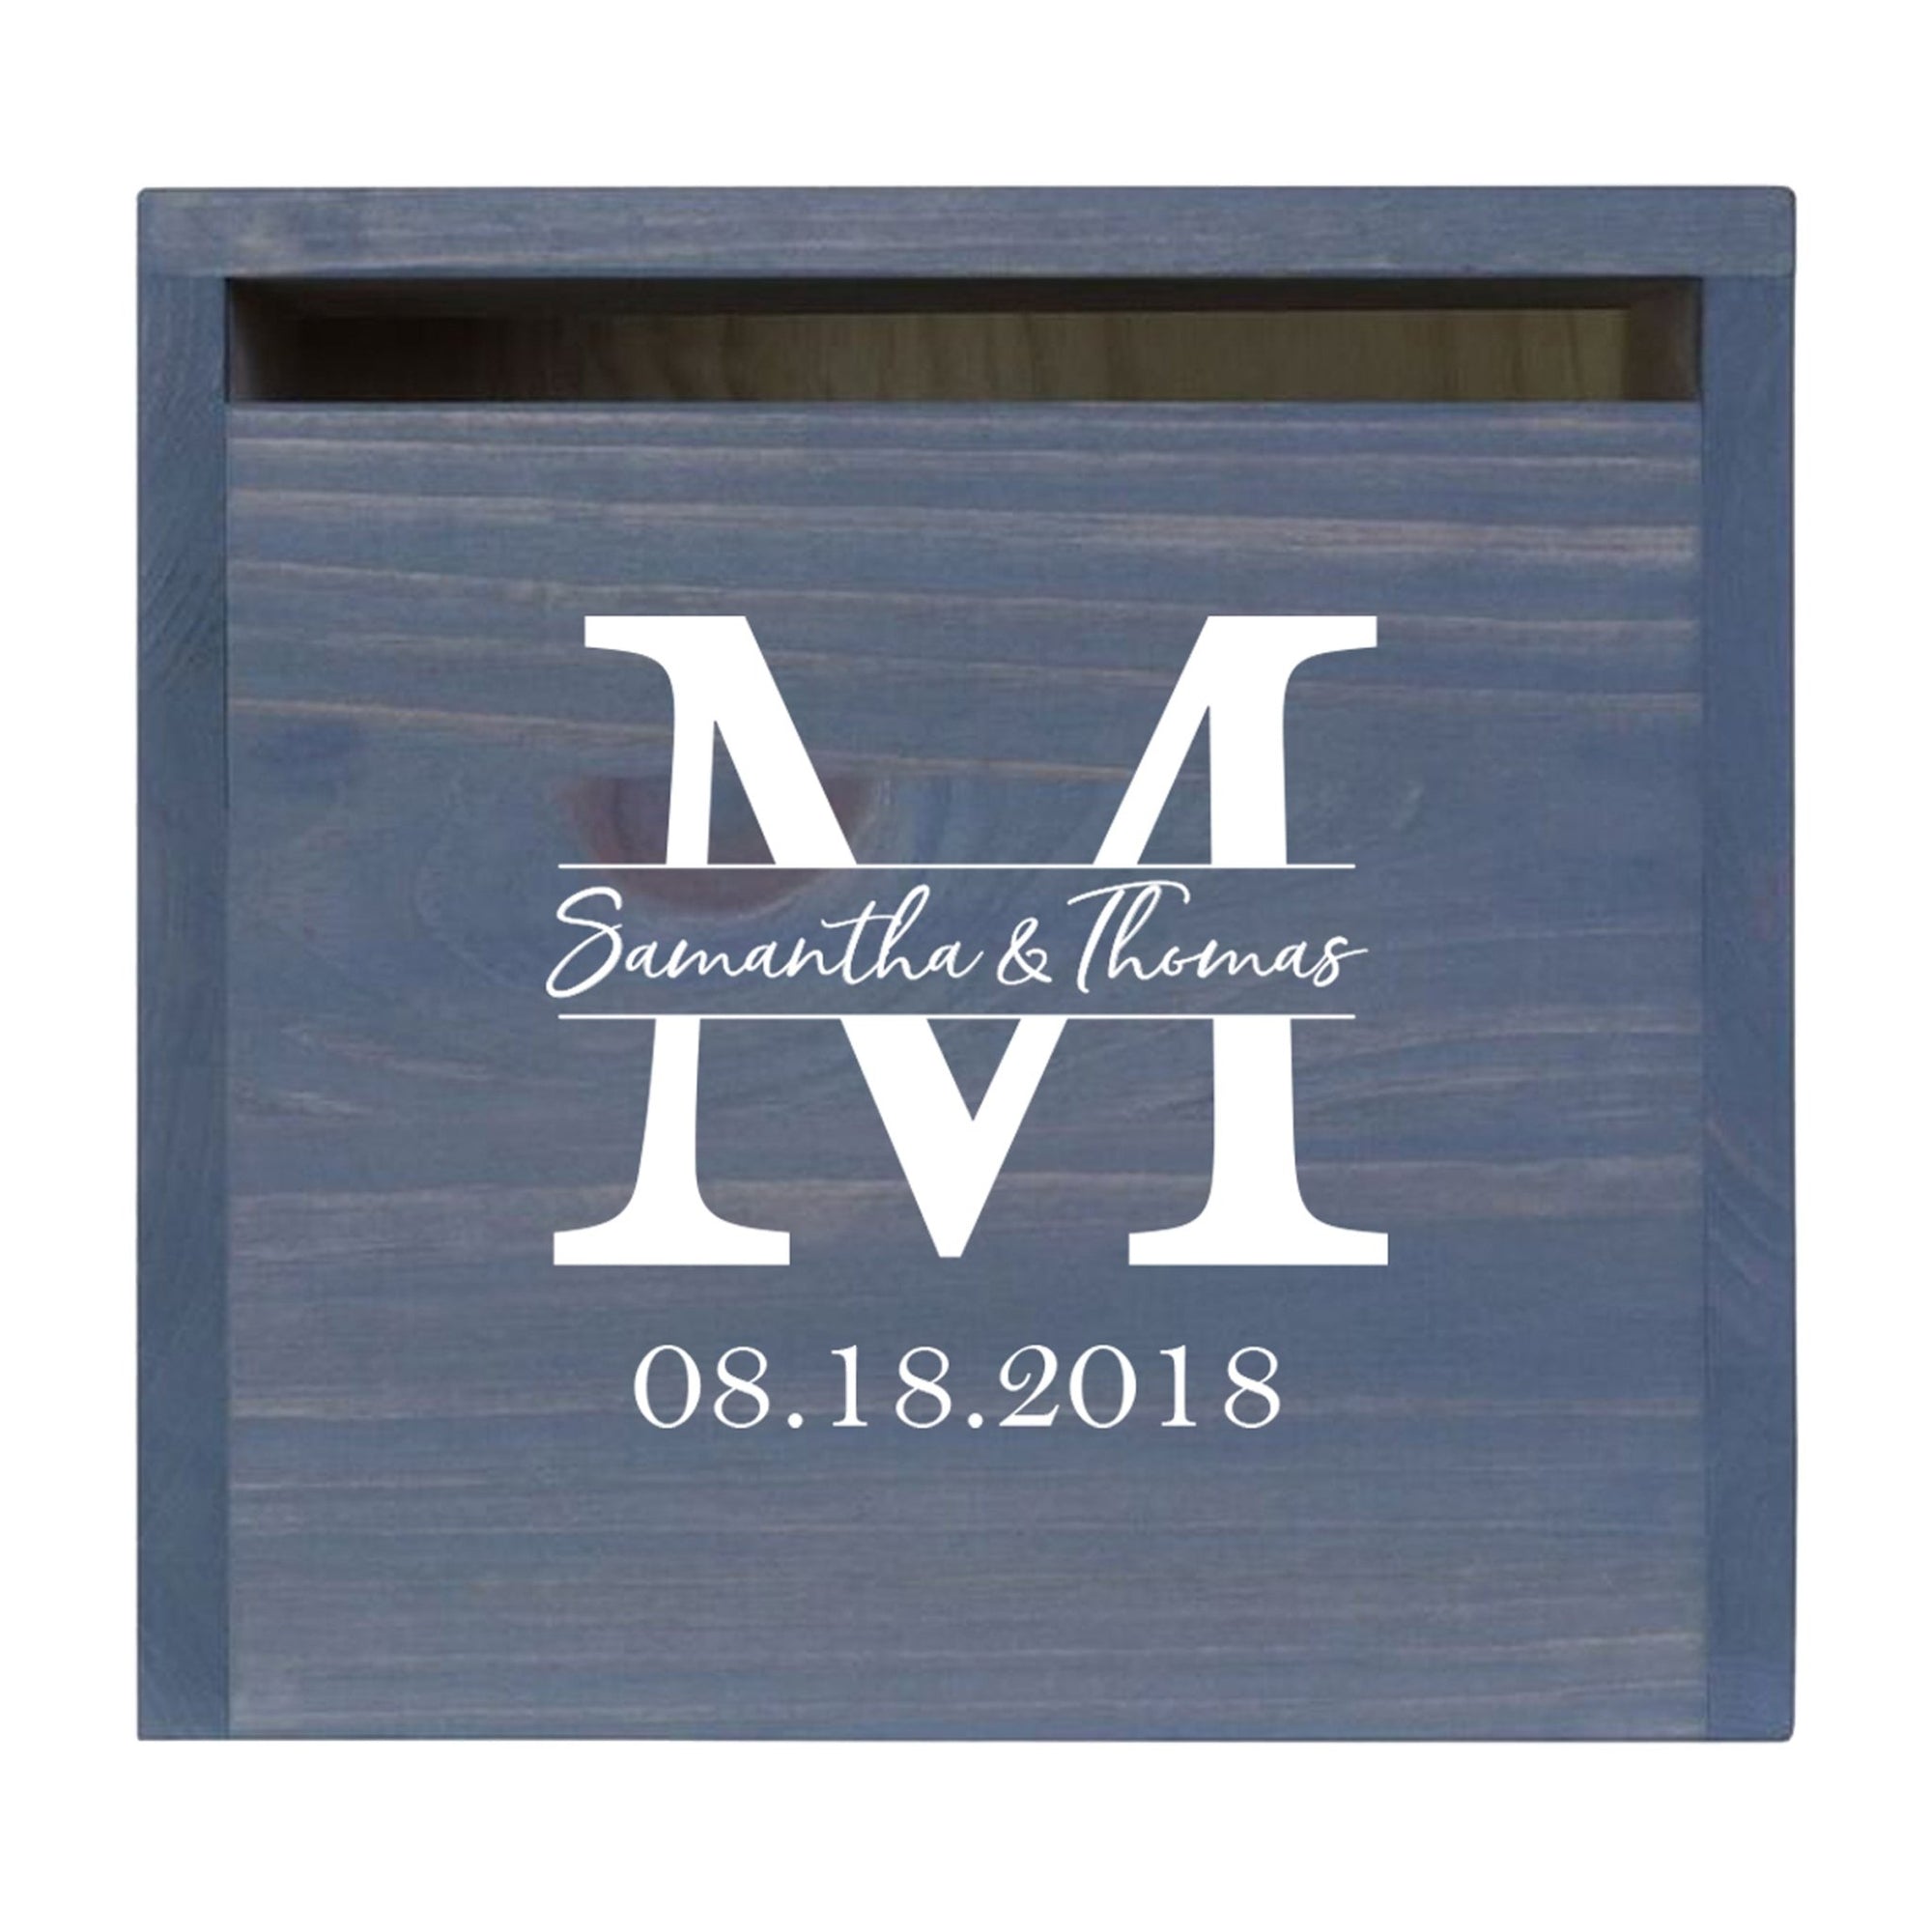 Personalized Wooden Card Box for Wedding Ceremonies, Venues, Receptions, Bridal Showers, and Engagement Parties 13.5x12 - Samatha & Thomas (M) - LifeSong Milestones